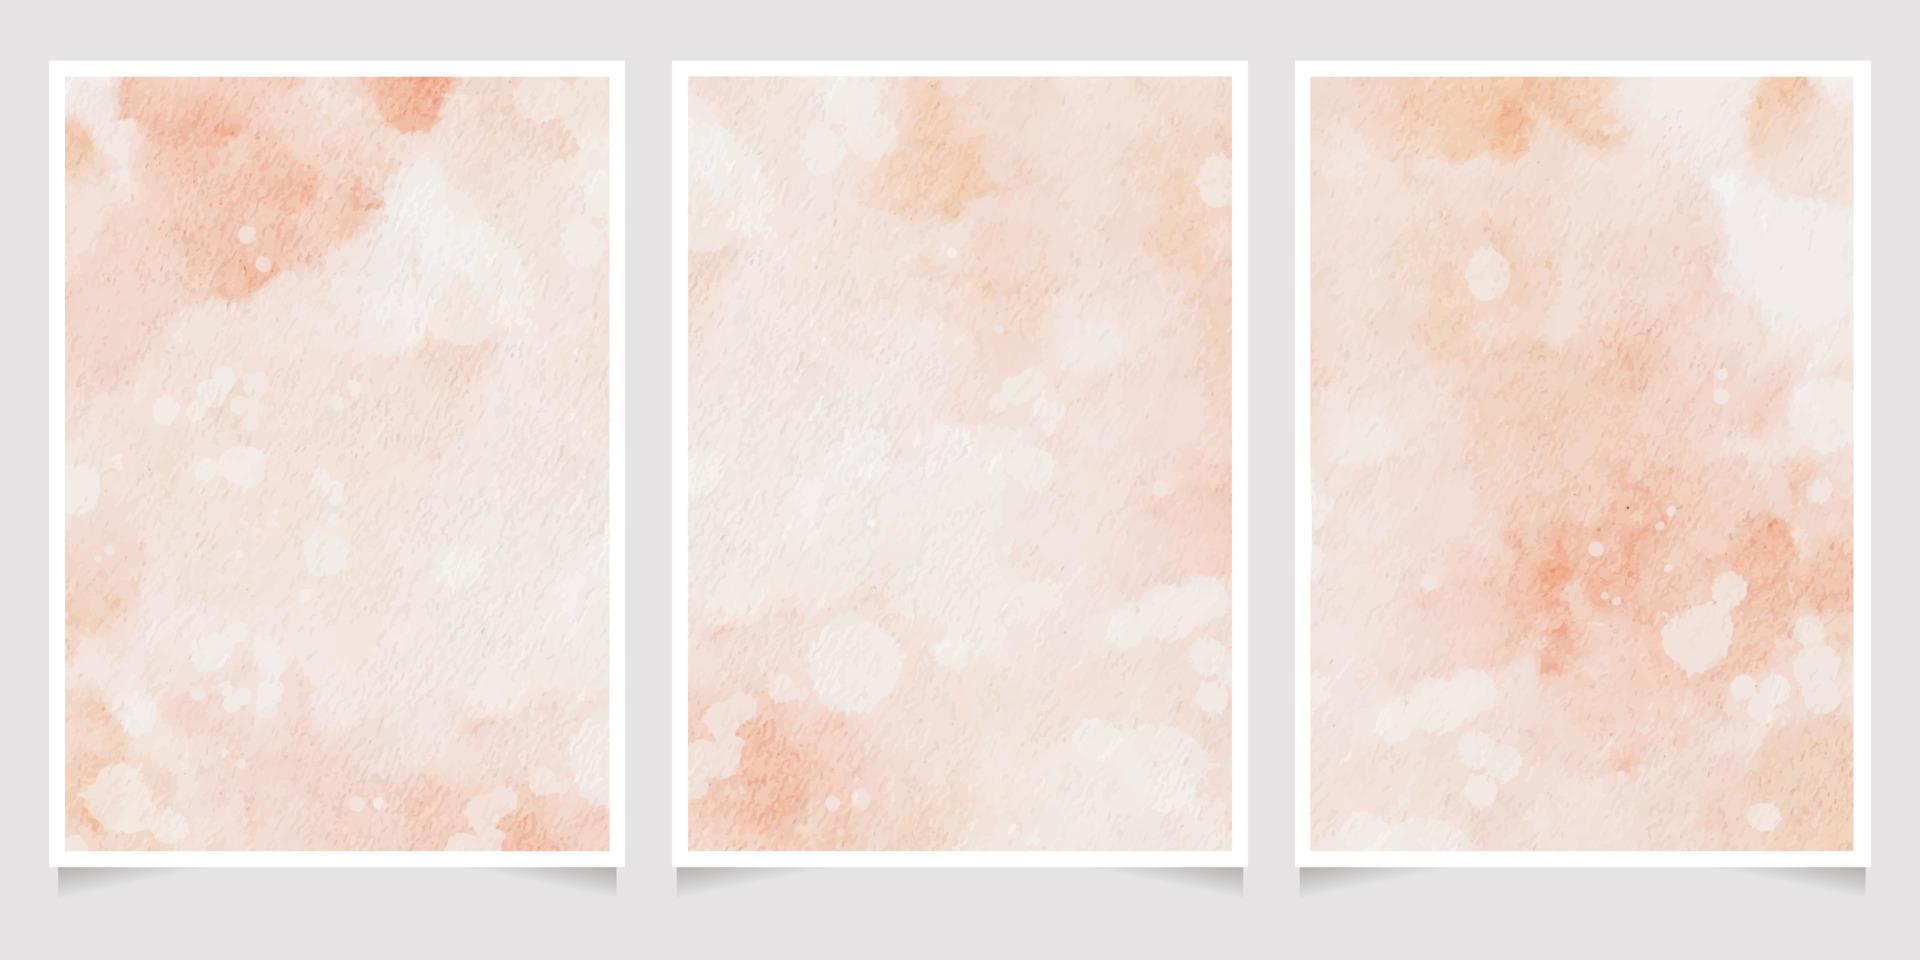 Old Textured Paper Watercolor Wet Wash Splash 5x7 Invitation Card  Background Template Collection Stock Illustration - Download Image Now -  iStock